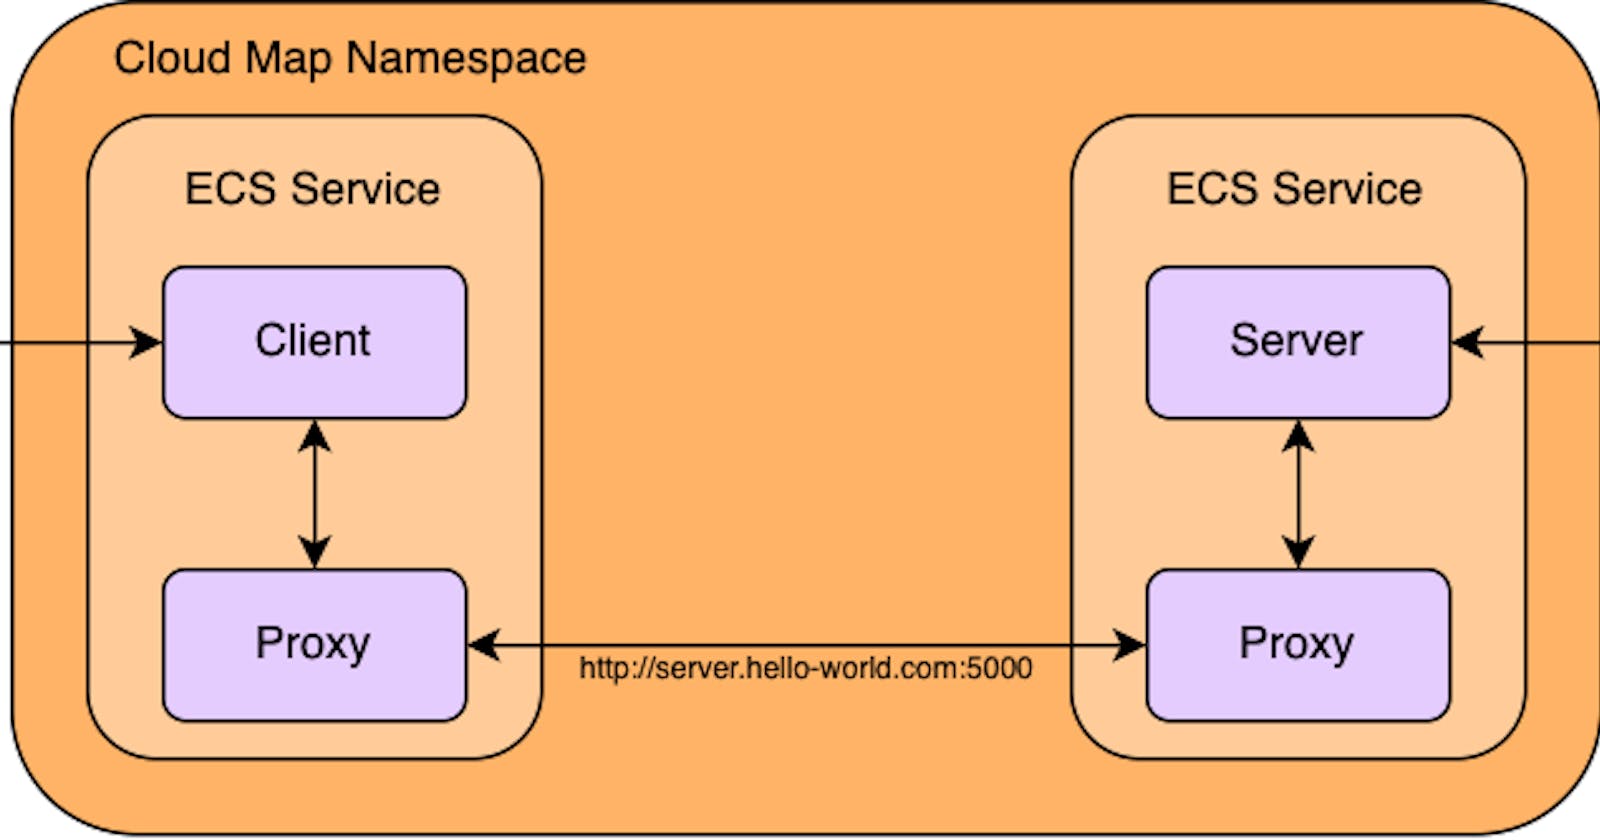 Implementing AWS Service Connect with Amazon ECS: A Step-by-Step Guide